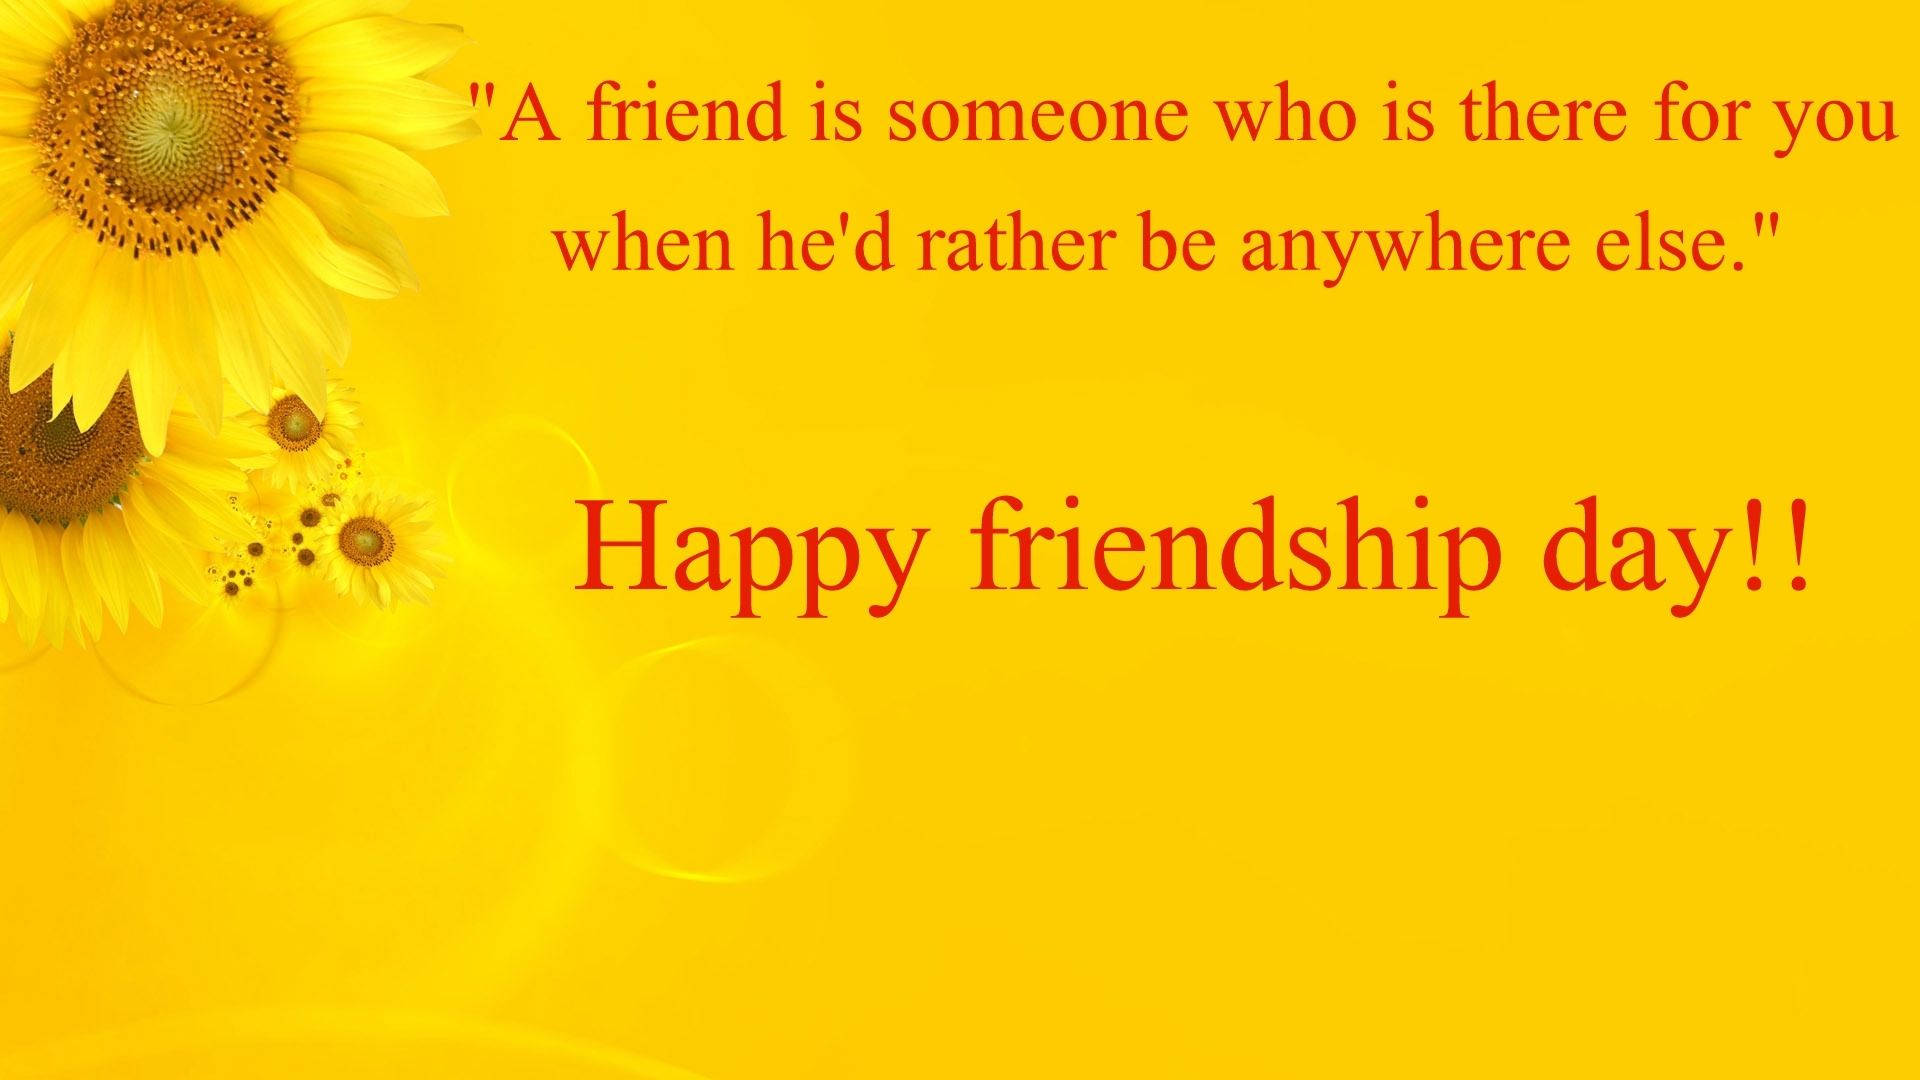 Friendship Day Quote With Sunflowers Wallpaper